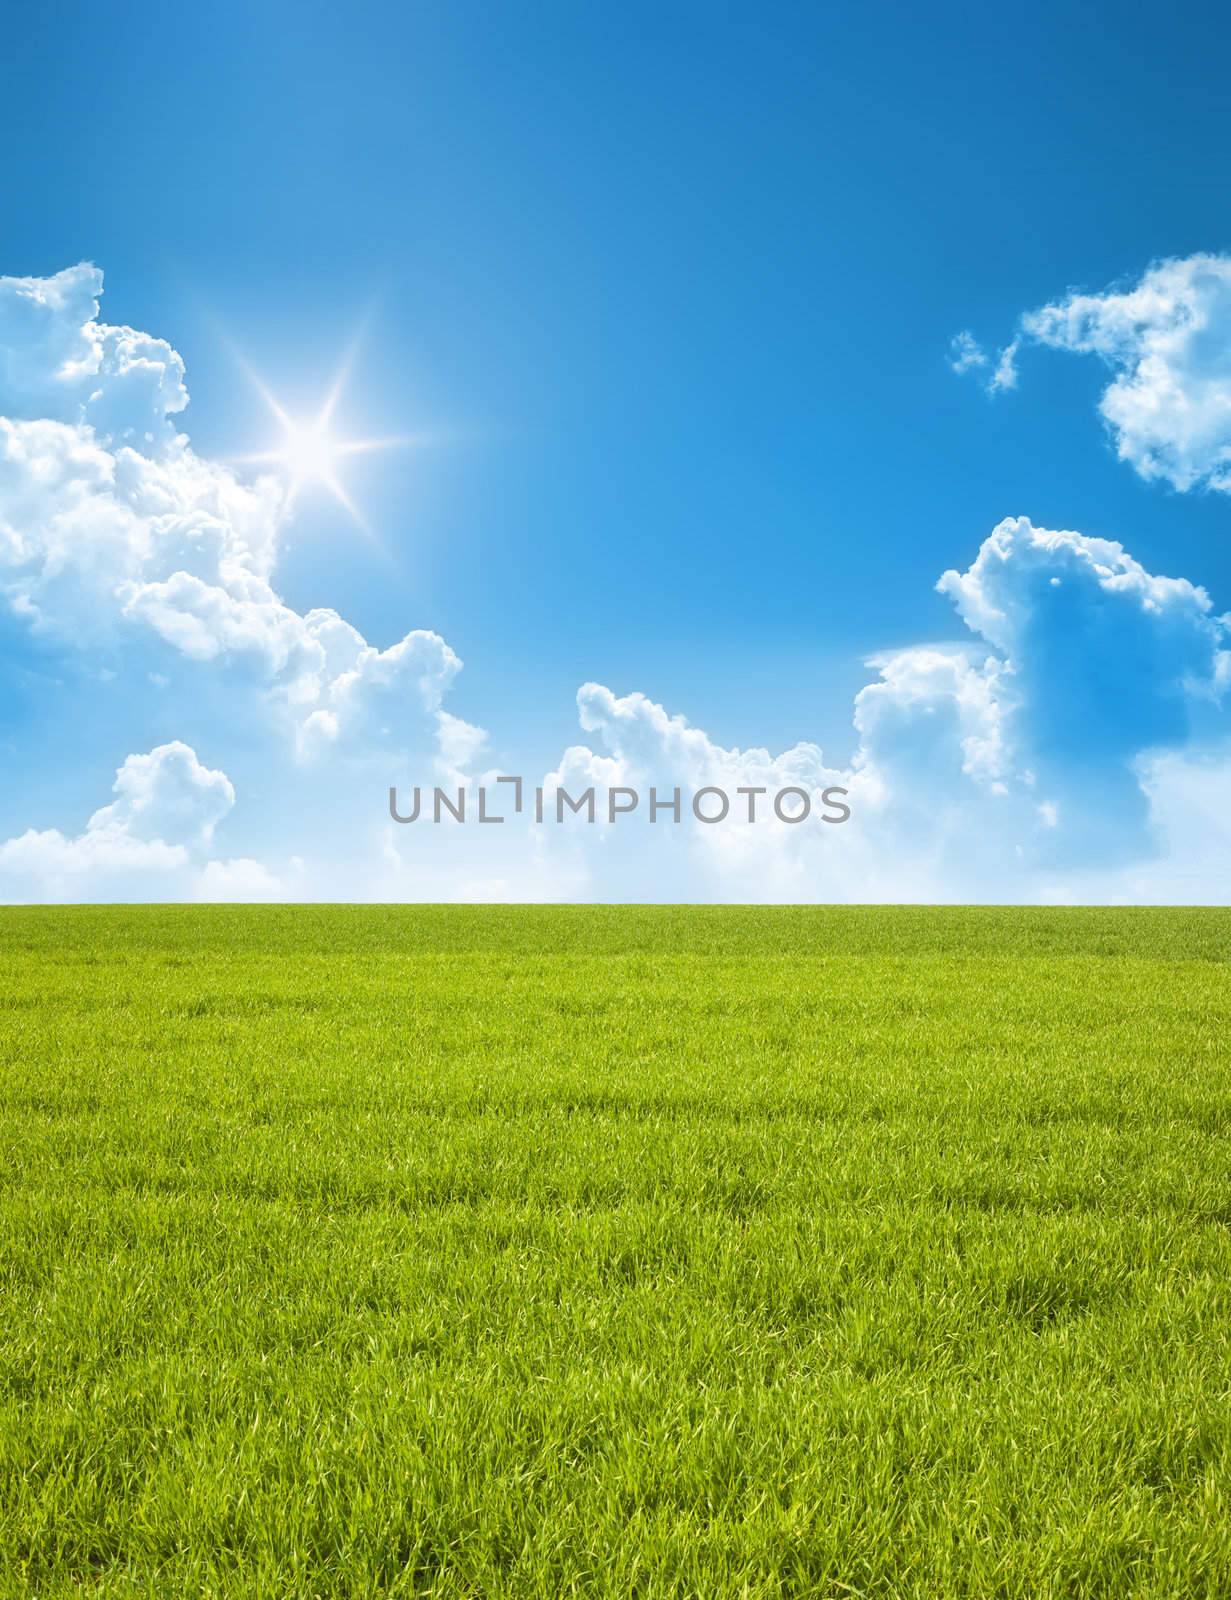 A photography of a blue sky and a green field